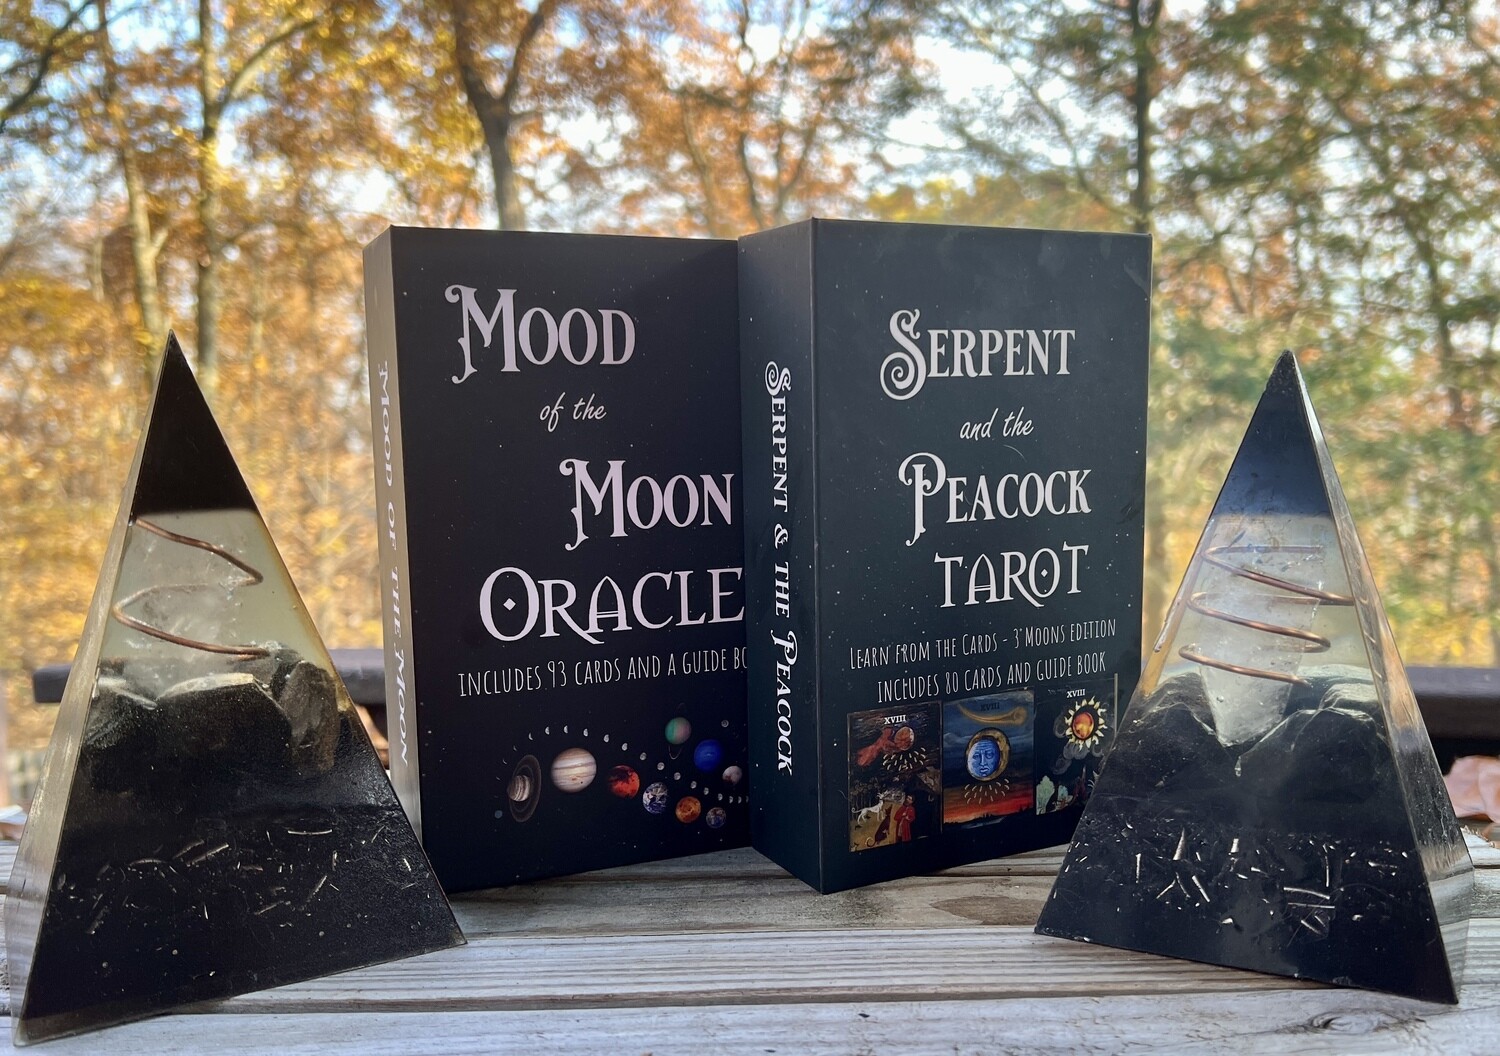 3 Moons Serpent and Peacock and Mood of the Moon Oracle Deck